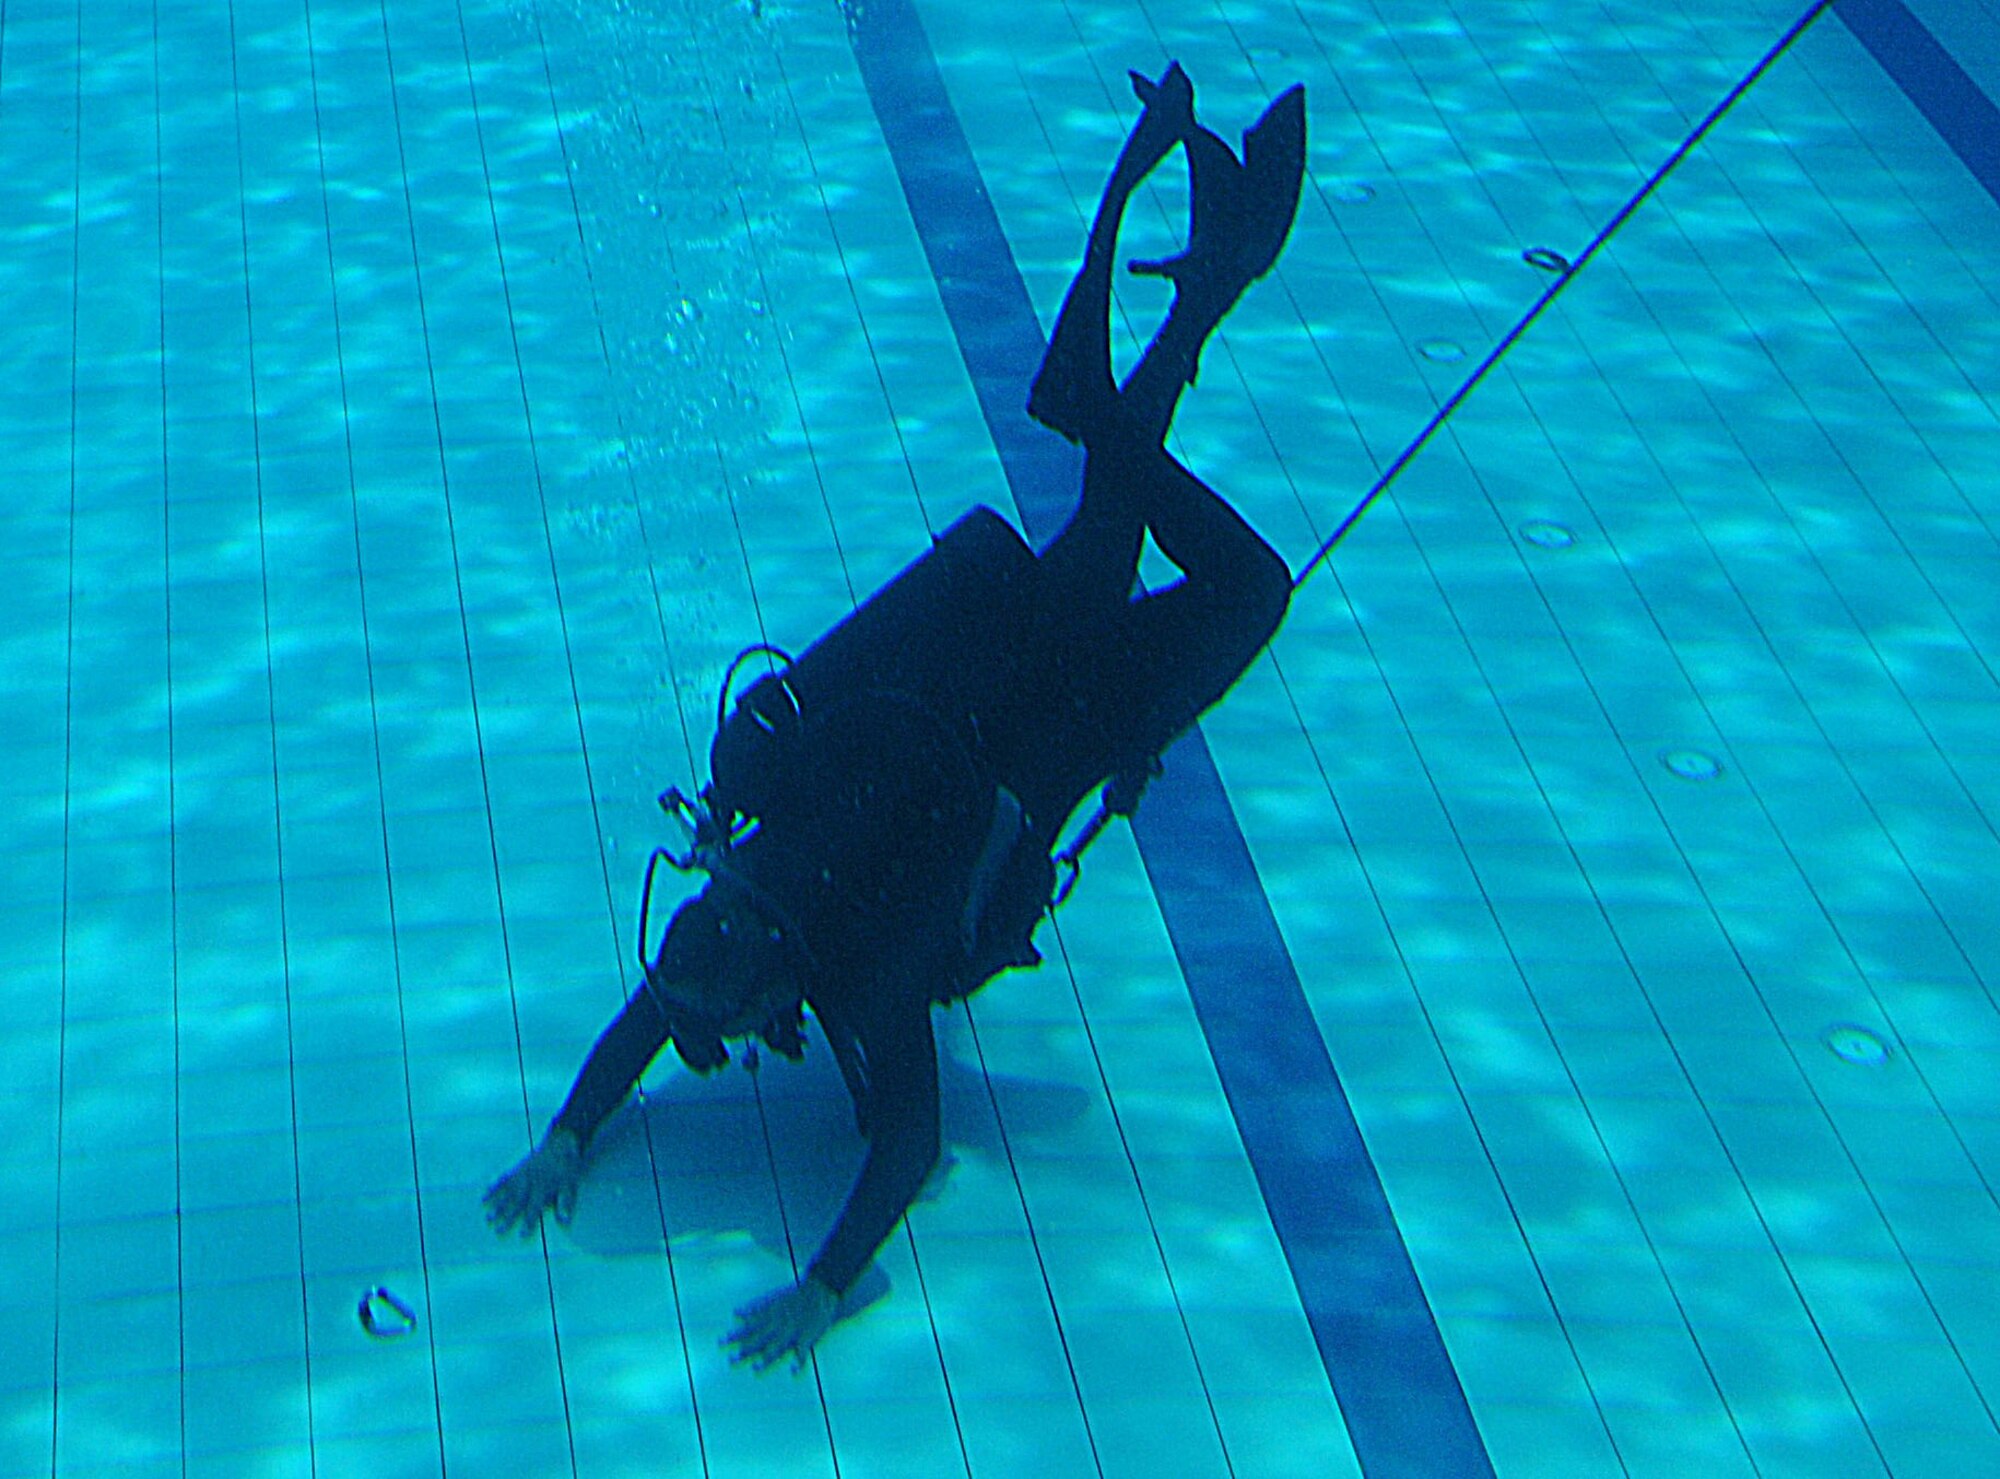 ON A MILTARY INSTALLATION IN MALAYSIA -- A Paskau member of the Royal Malaysian Air Force attempts to recover an item during an underwater search and recovery course here May 28 as part of Teak Mint 09-1. The Paskau is the special operations branch of the Royal Malaysian Air Force. Teak Mint 09-1 is a training exchange designed to enhance U.S and Malaysian military training and capabilities. (Photo by Tech. Sgt. Aaron Cram)